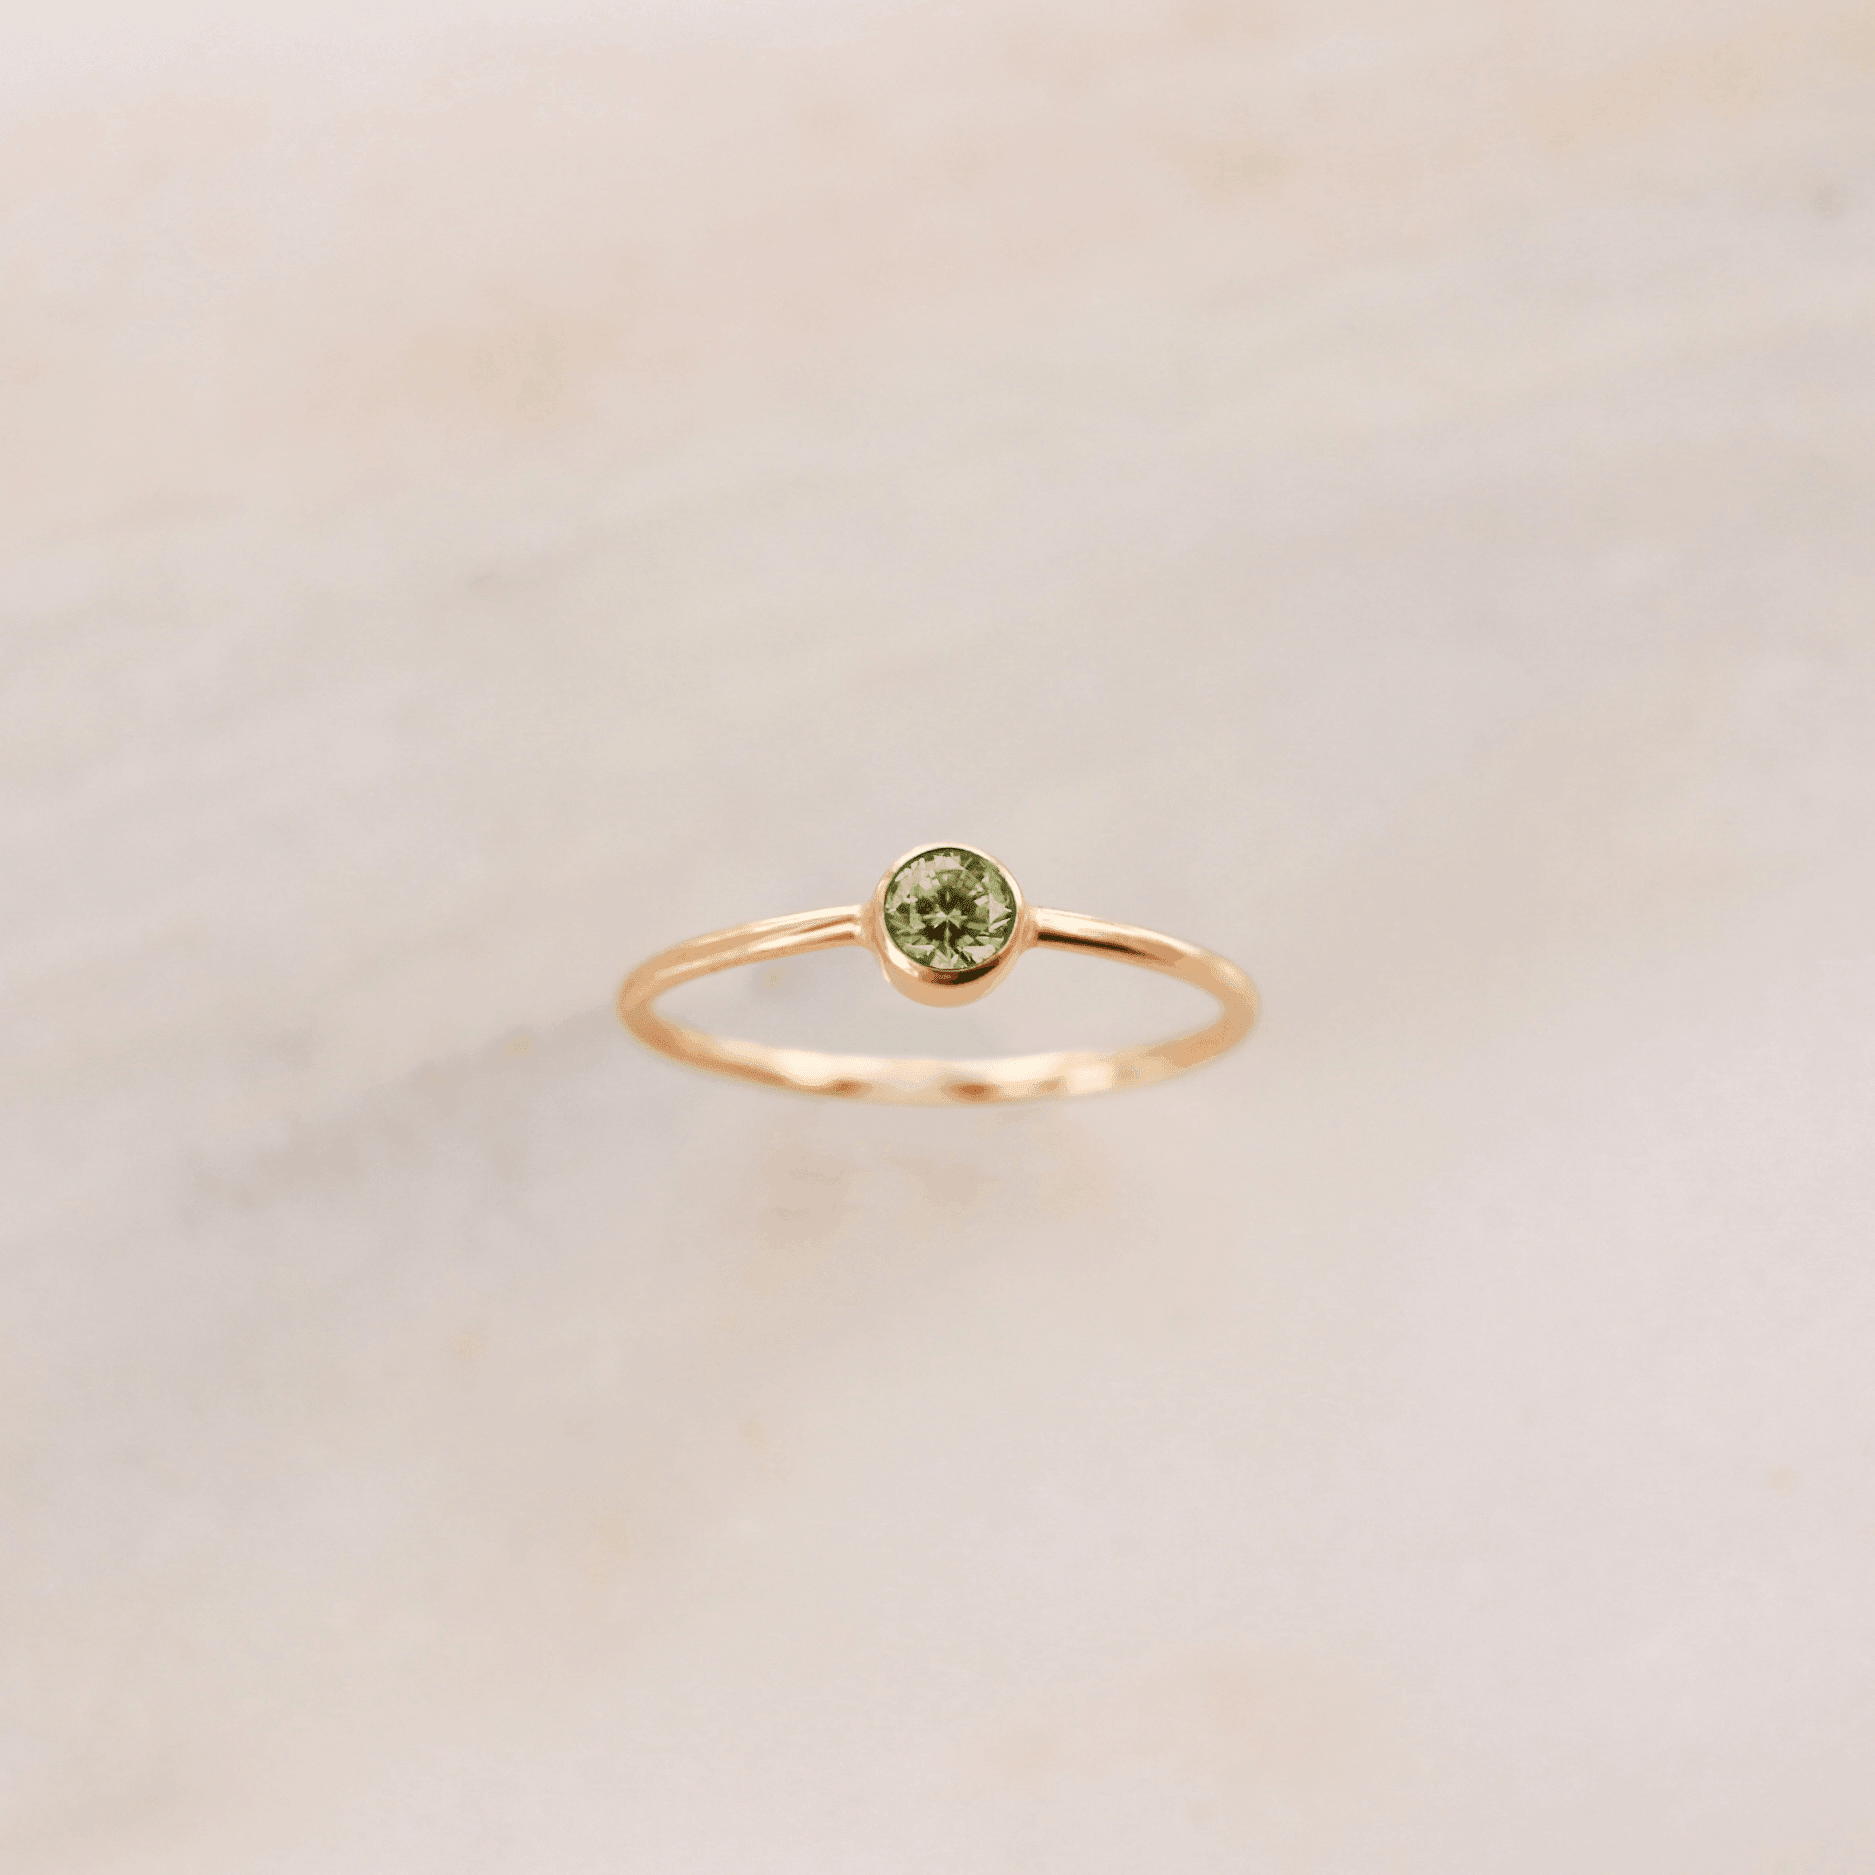 August Birthstone Ring ∙ Peridot - Nolia Jewelry - Meaningful + Sustainably Handcrafted Jewelry